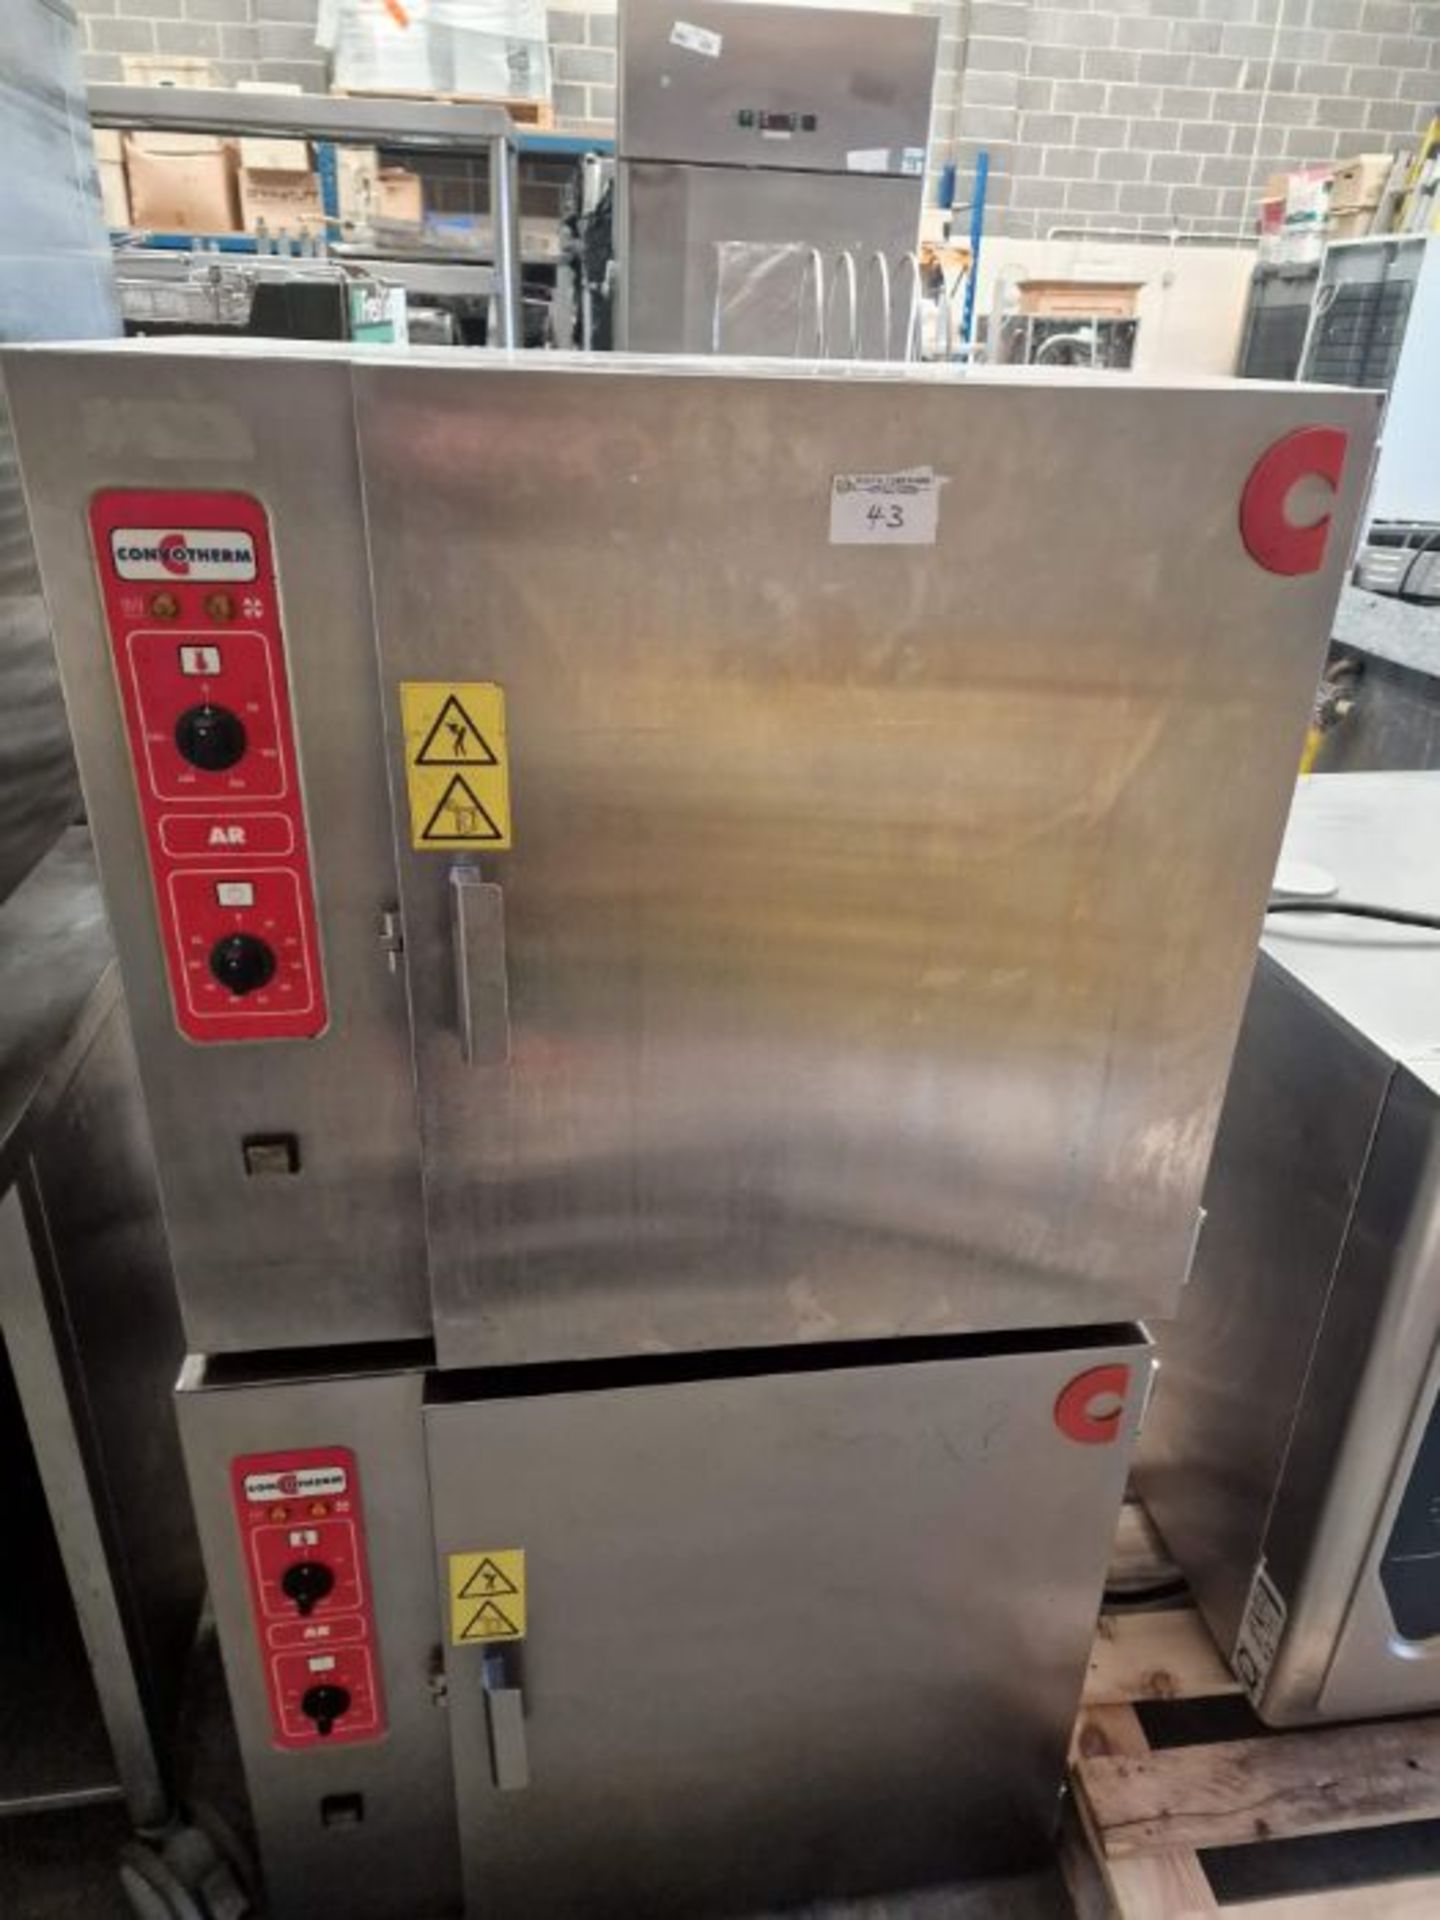 Convotherm convection oven.